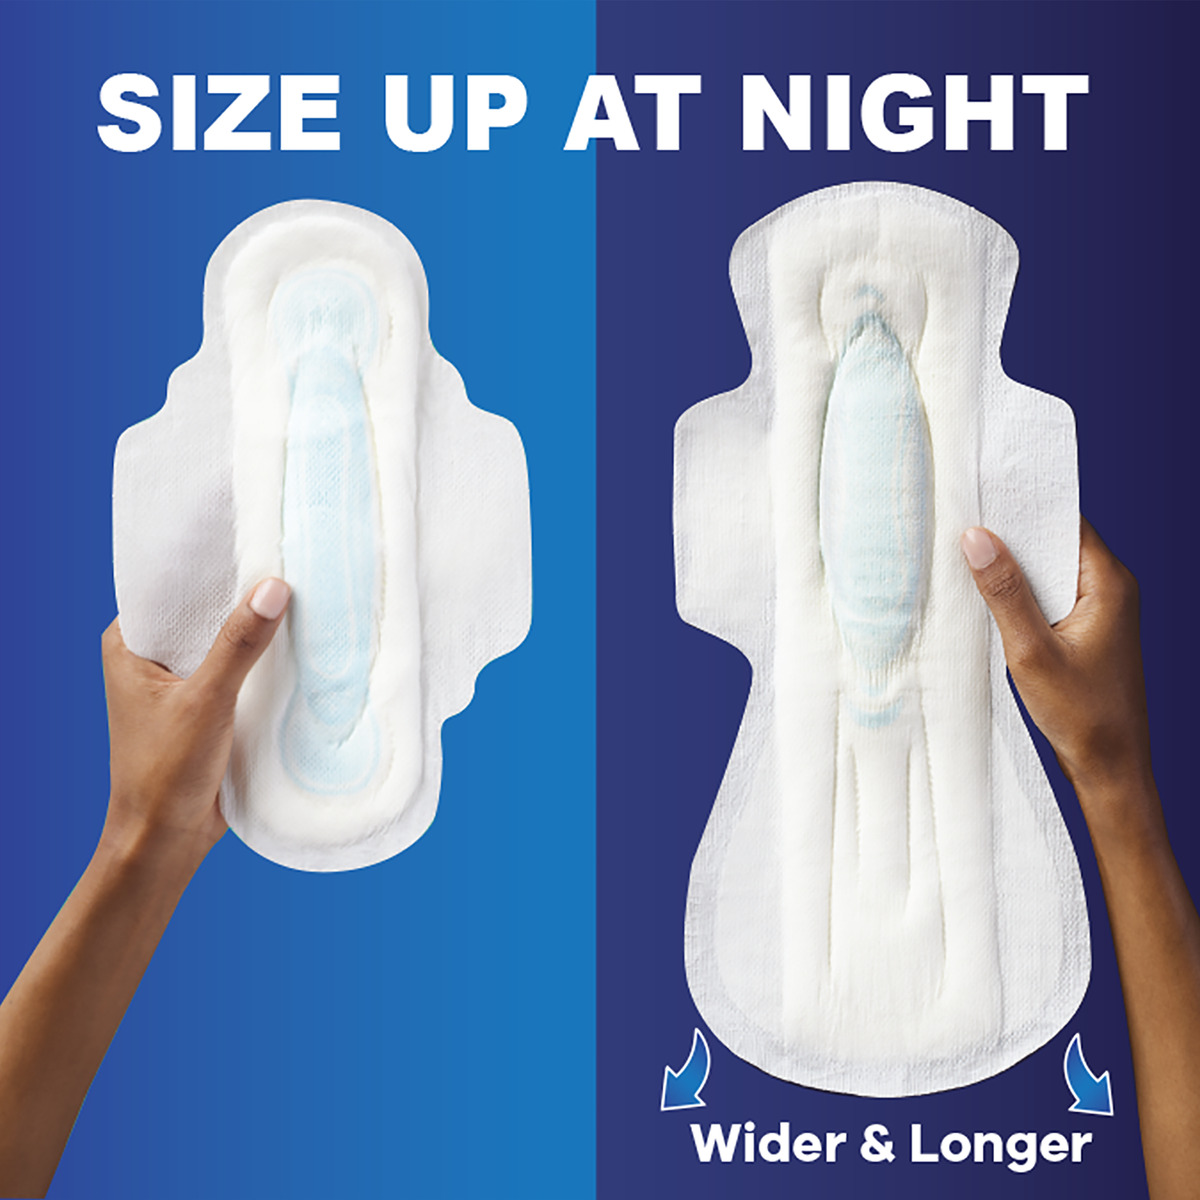 Size up at night